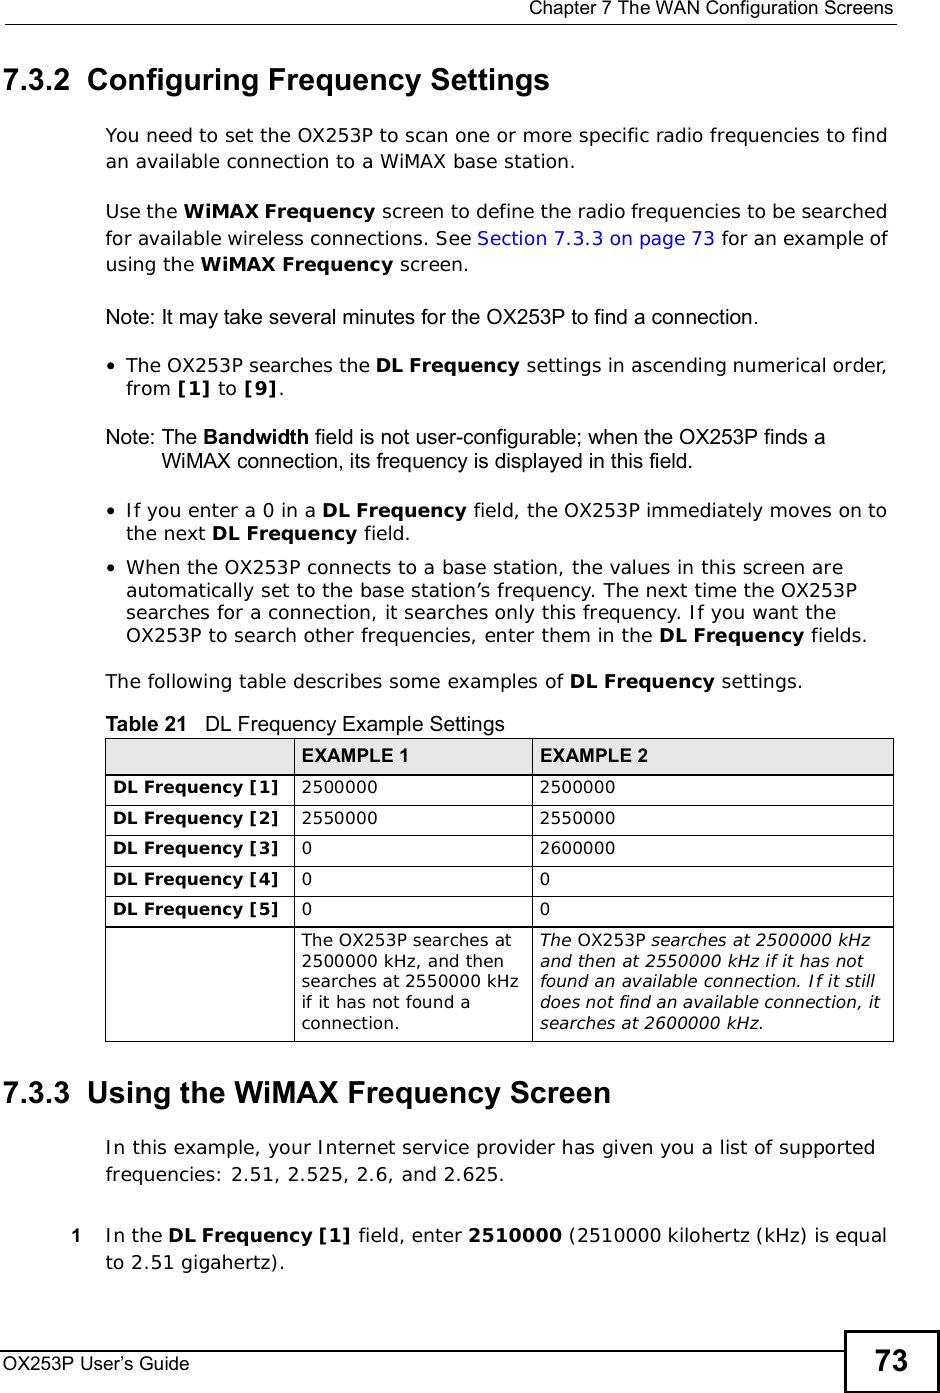  Chapter 7The WAN Configuration ScreensOX253P User’s Guide 737.3.2  Configuring Frequency SettingsYou need to set the OX253P to scan one or more specific radio frequencies to find an available connection to a WiMAX base station. Use the WiMAX Frequency screen to define the radio frequencies to be searched for available wireless connections. See Section 7.3.3 on page 73 for an example of using the WiMAX Frequency screen.Note: It may take several minutes for the OX253P to find a connection.•The OX253P searches the DL Frequency settings in ascending numerical order, from [1] to [9].Note: The Bandwidth field is not user-configurable; when the OX253P finds a WiMAX connection, its frequency is displayed in this field.•If you enter a 0 in a DL Frequency field, the OX253P immediately moves on to the next DL Frequency field.•When the OX253P connects to a base station, the values in this screen are automatically set to the base station’s frequency. The next time the OX253P searches for a connection, it searches only this frequency. If you want the OX253P to search other frequencies, enter them in the DL Frequency fields.The following table describes some examples of DL Frequency settings.7.3.3  Using the WiMAX Frequency ScreenIn this example, your Internet service provider has given you a list of supported frequencies: 2.51, 2.525, 2.6, and 2.625. 1In the DL Frequency [1] field, enter 2510000 (2510000 kilohertz (kHz) is equal to 2.51 gigahertz).Table 21   DL Frequency Example SettingsEXAMPLE 1 EXAMPLE 2DL Frequency [1] 25000002500000DL Frequency [2] 25500002550000DL Frequency [3] 02600000DL Frequency [4] 00DL Frequency [5] 00The OX253P searches at 2500000 kHz, and then searches at 2550000 kHz if it has not found a connection.The OX253P searches at 2500000 kHz and then at 2550000 kHz if it has not found an available connection. If it still does not find an available connection, it searches at 2600000 kHz.